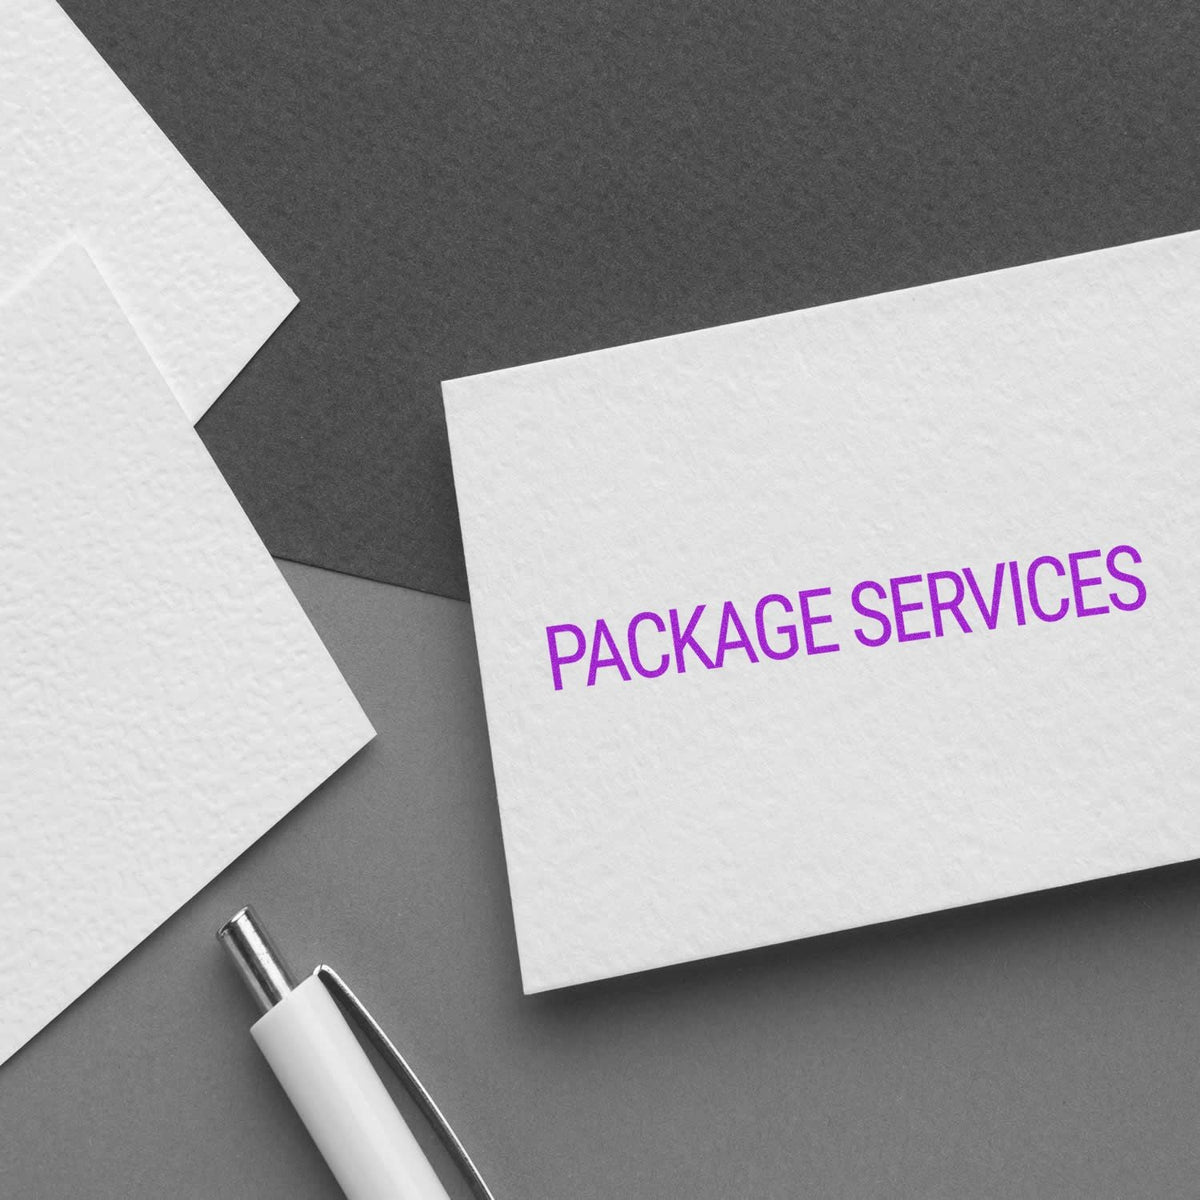 Self-Inking Package Services Stamp In Use